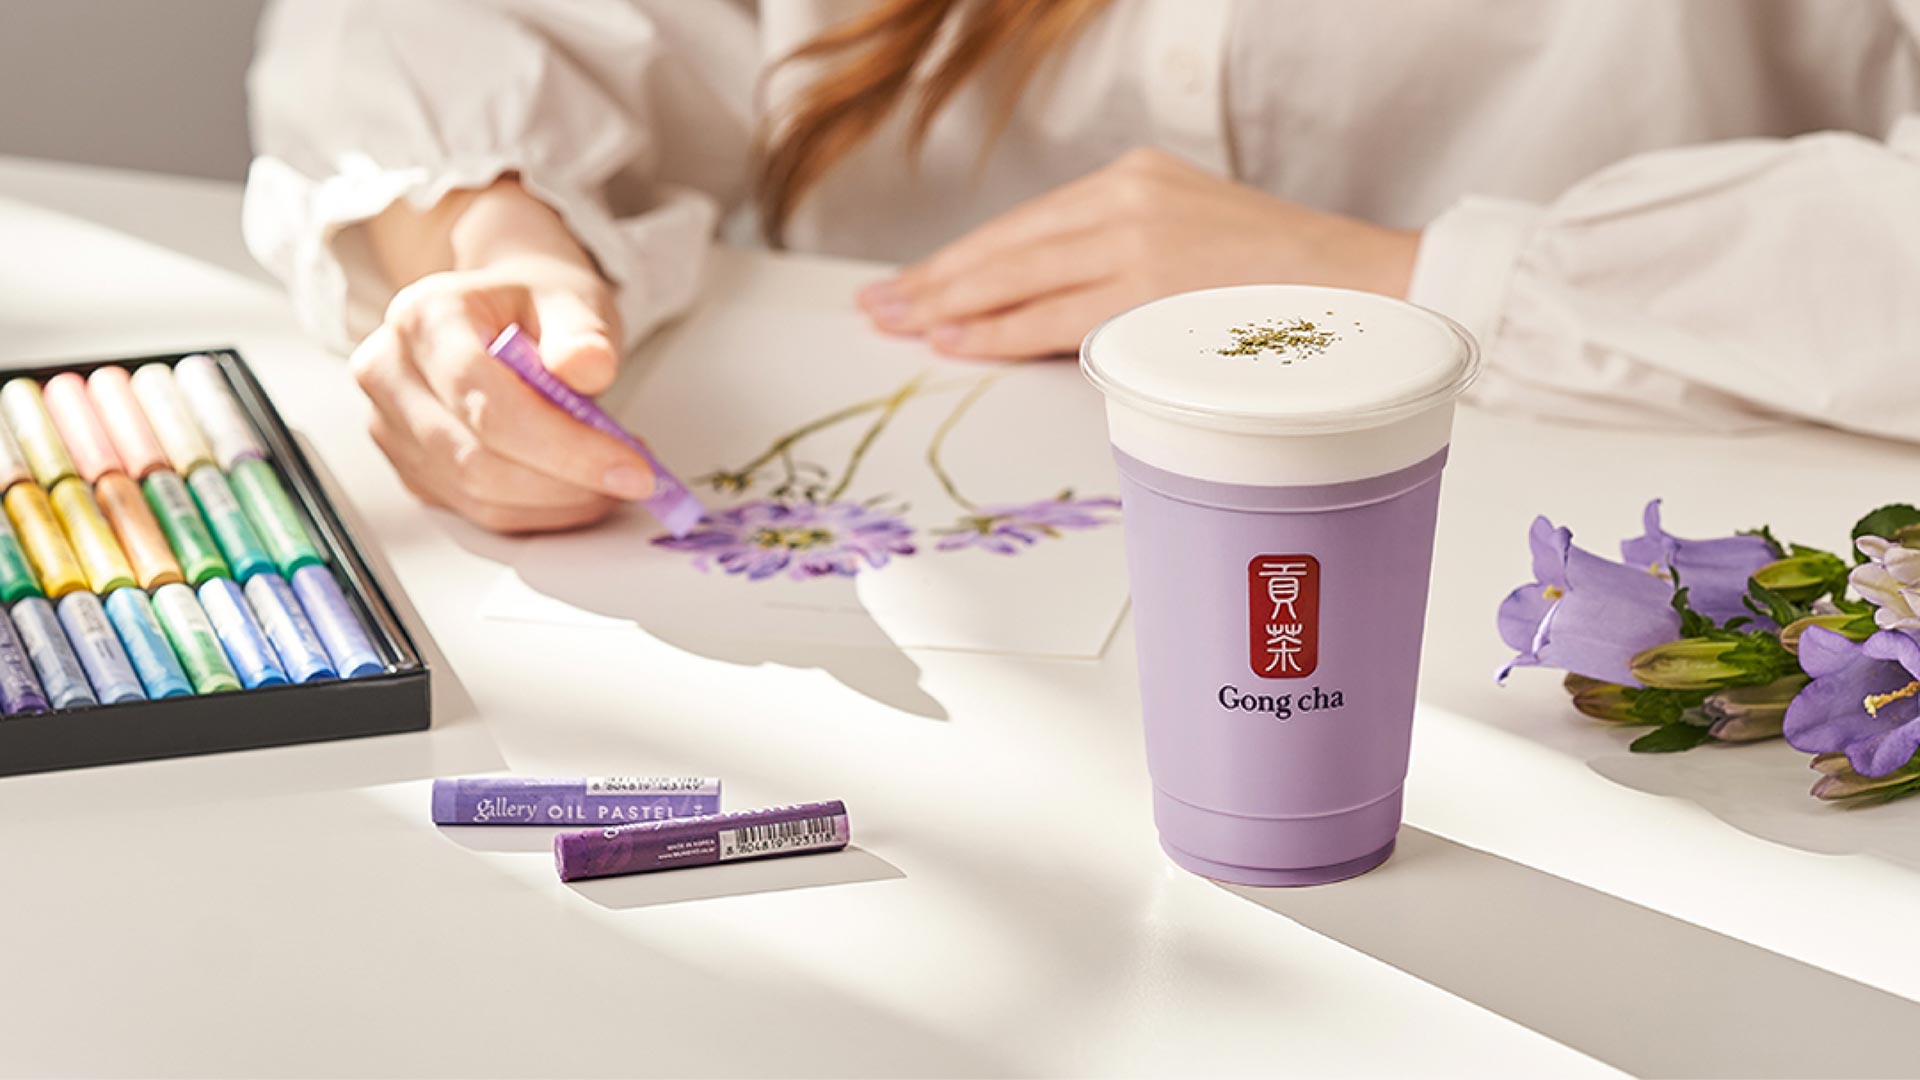 Gong cha drink on table while drawing